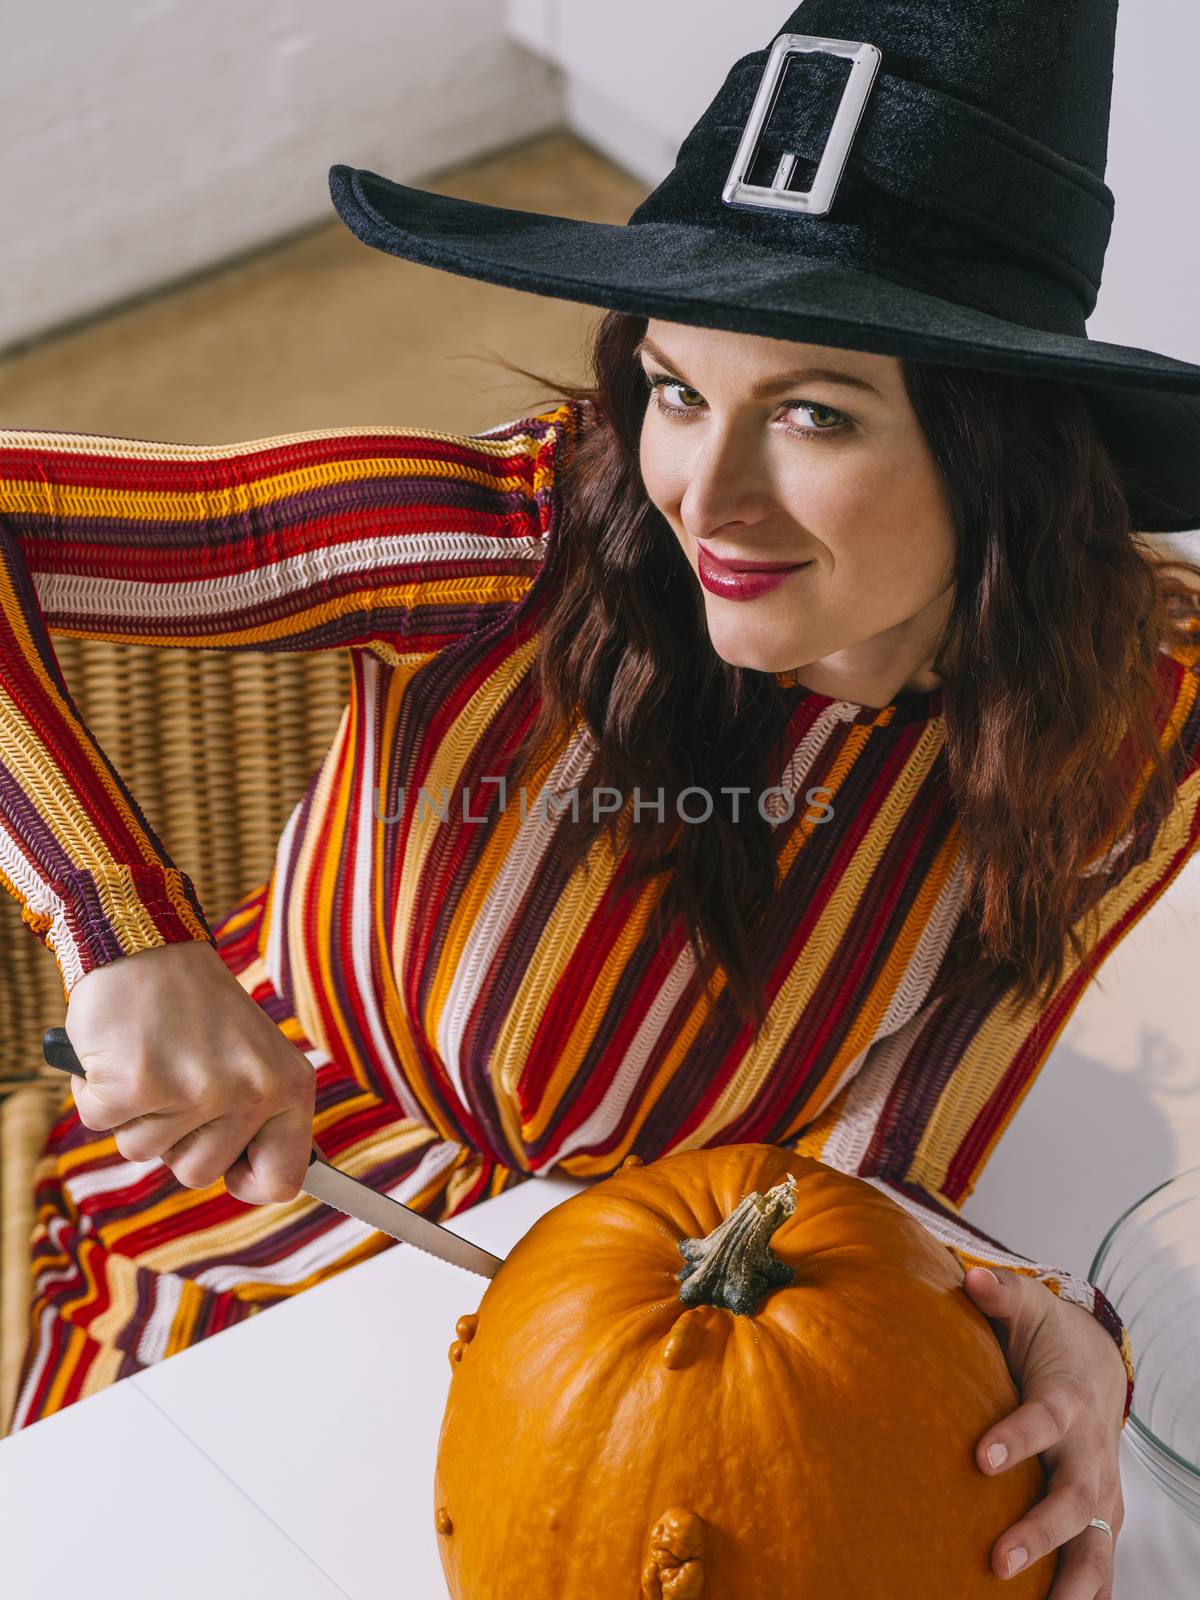 Beautiful young woman wearing witch's black hat  in her kitchen cutting a pumpkin for Halloween.